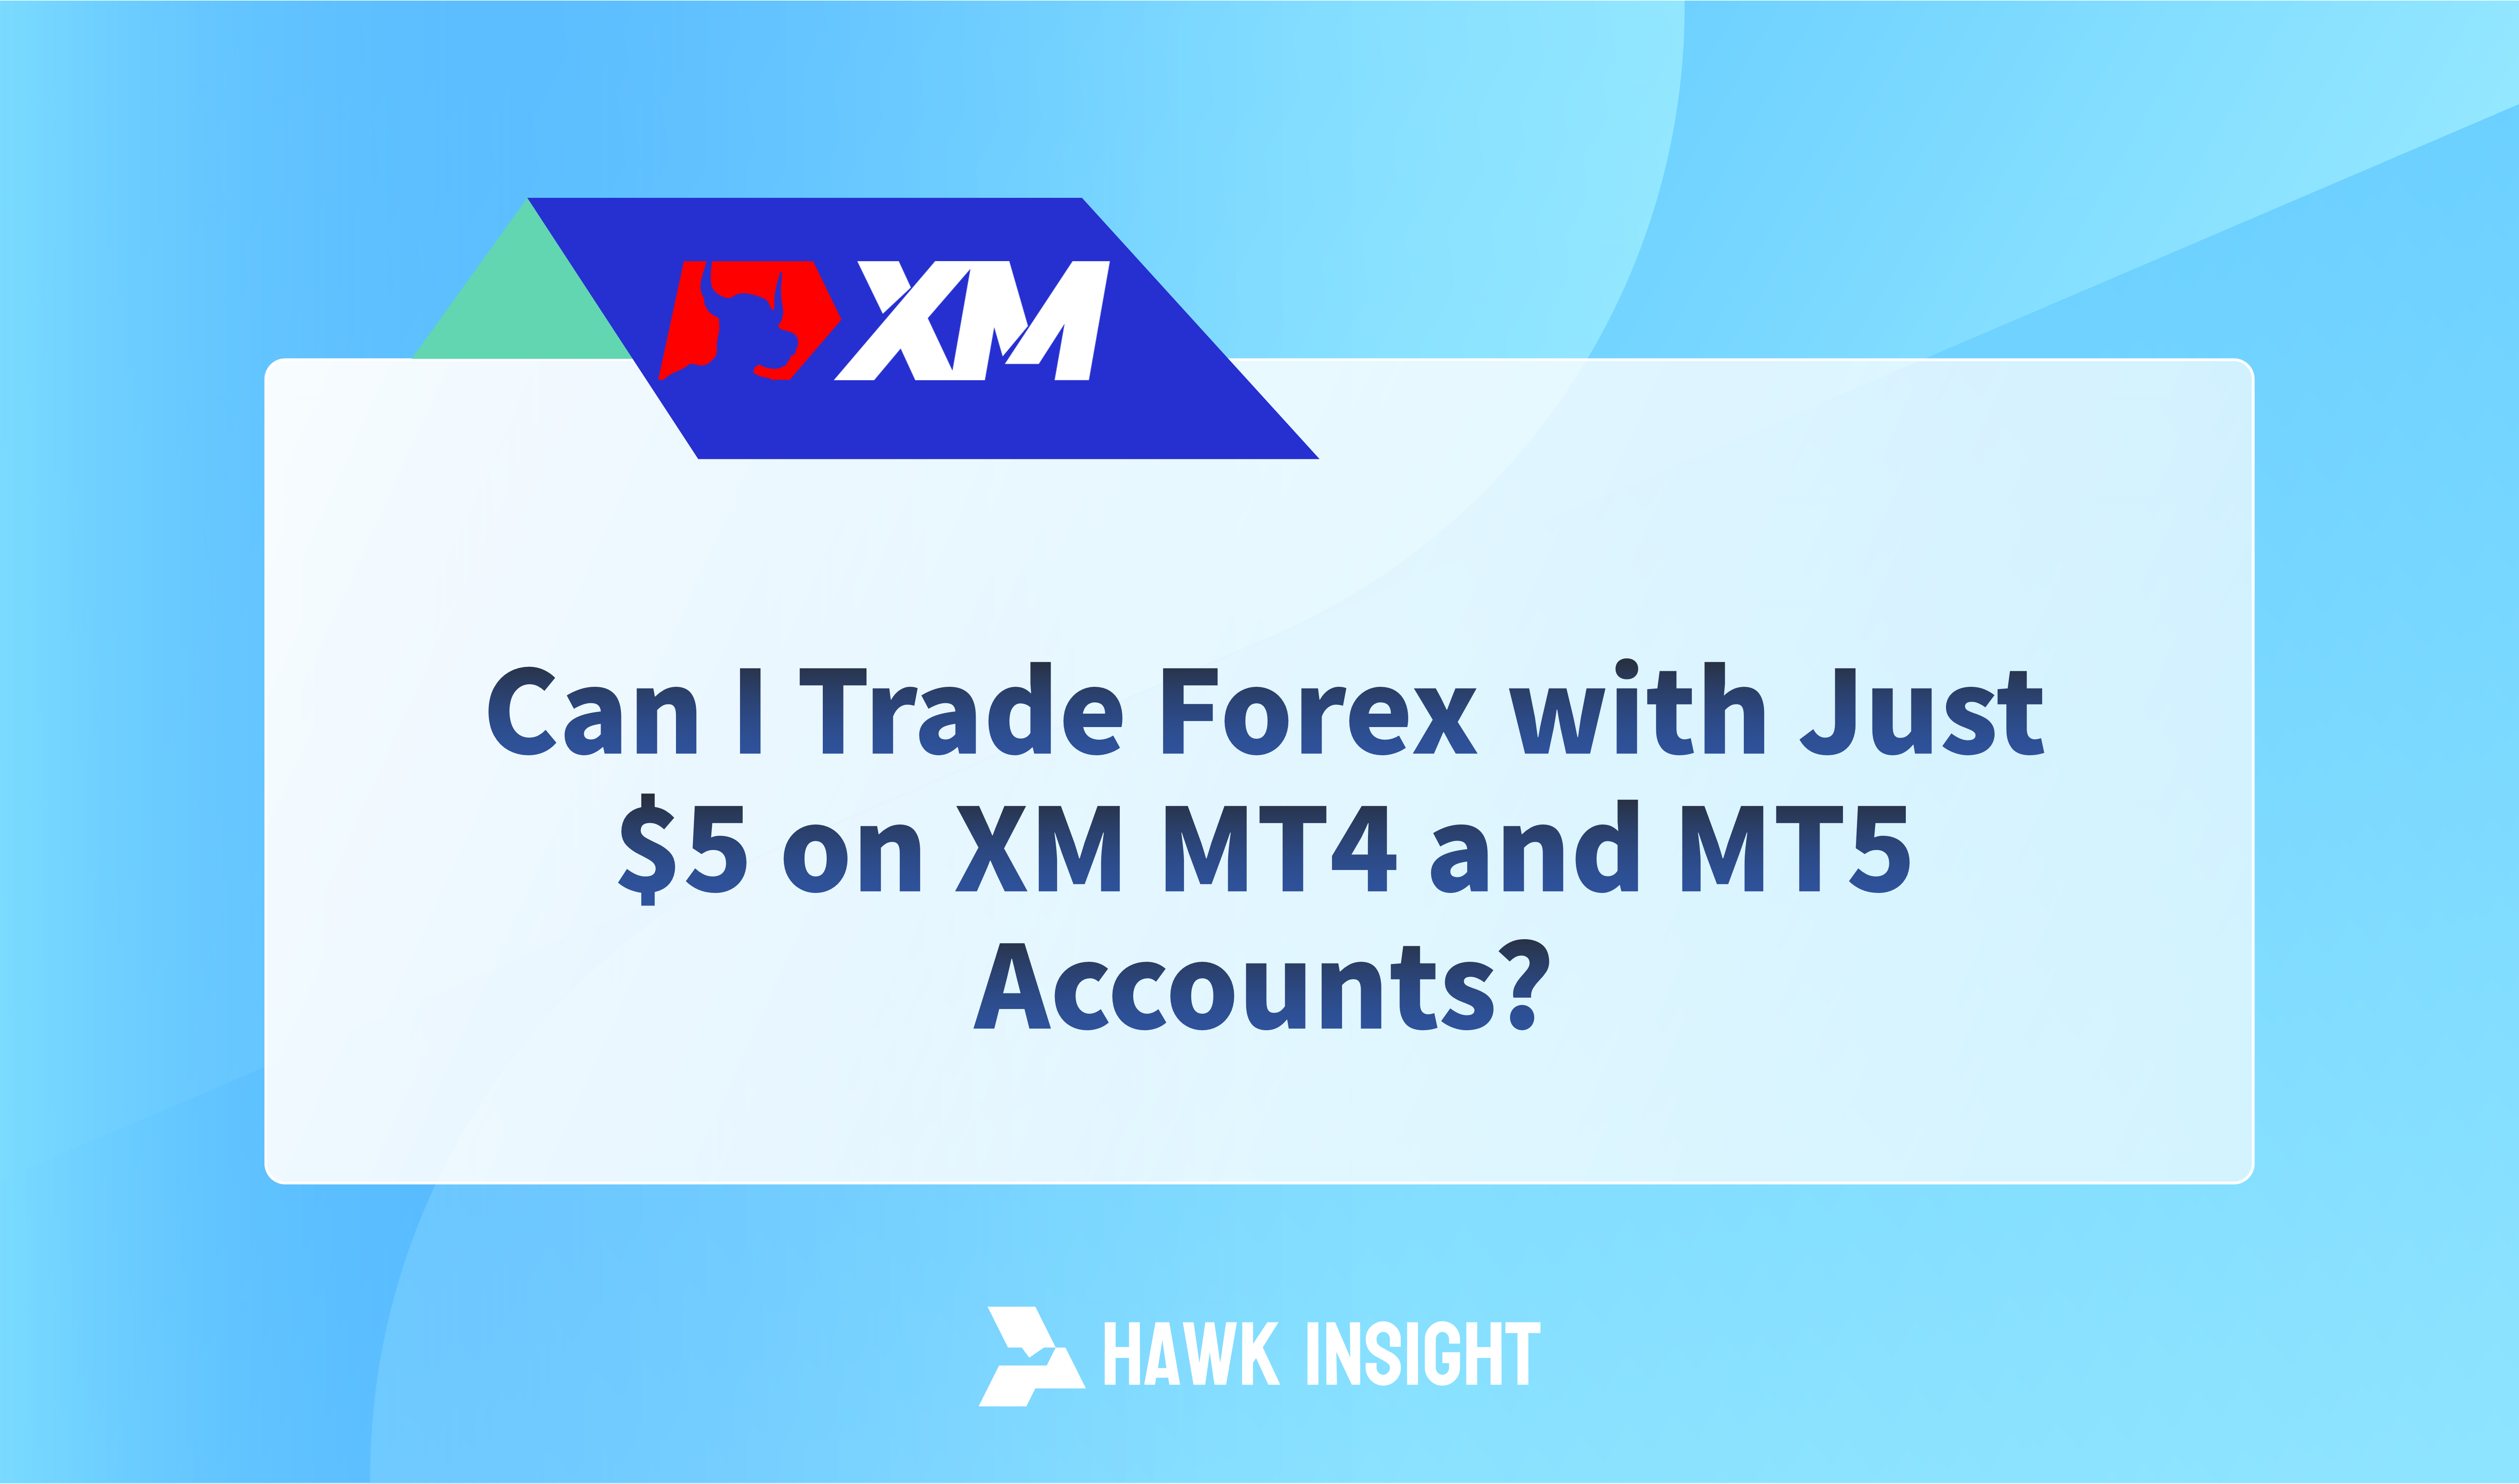 Can I Trade Forex with Just $5 on XM MT4 and MT5 Accounts?